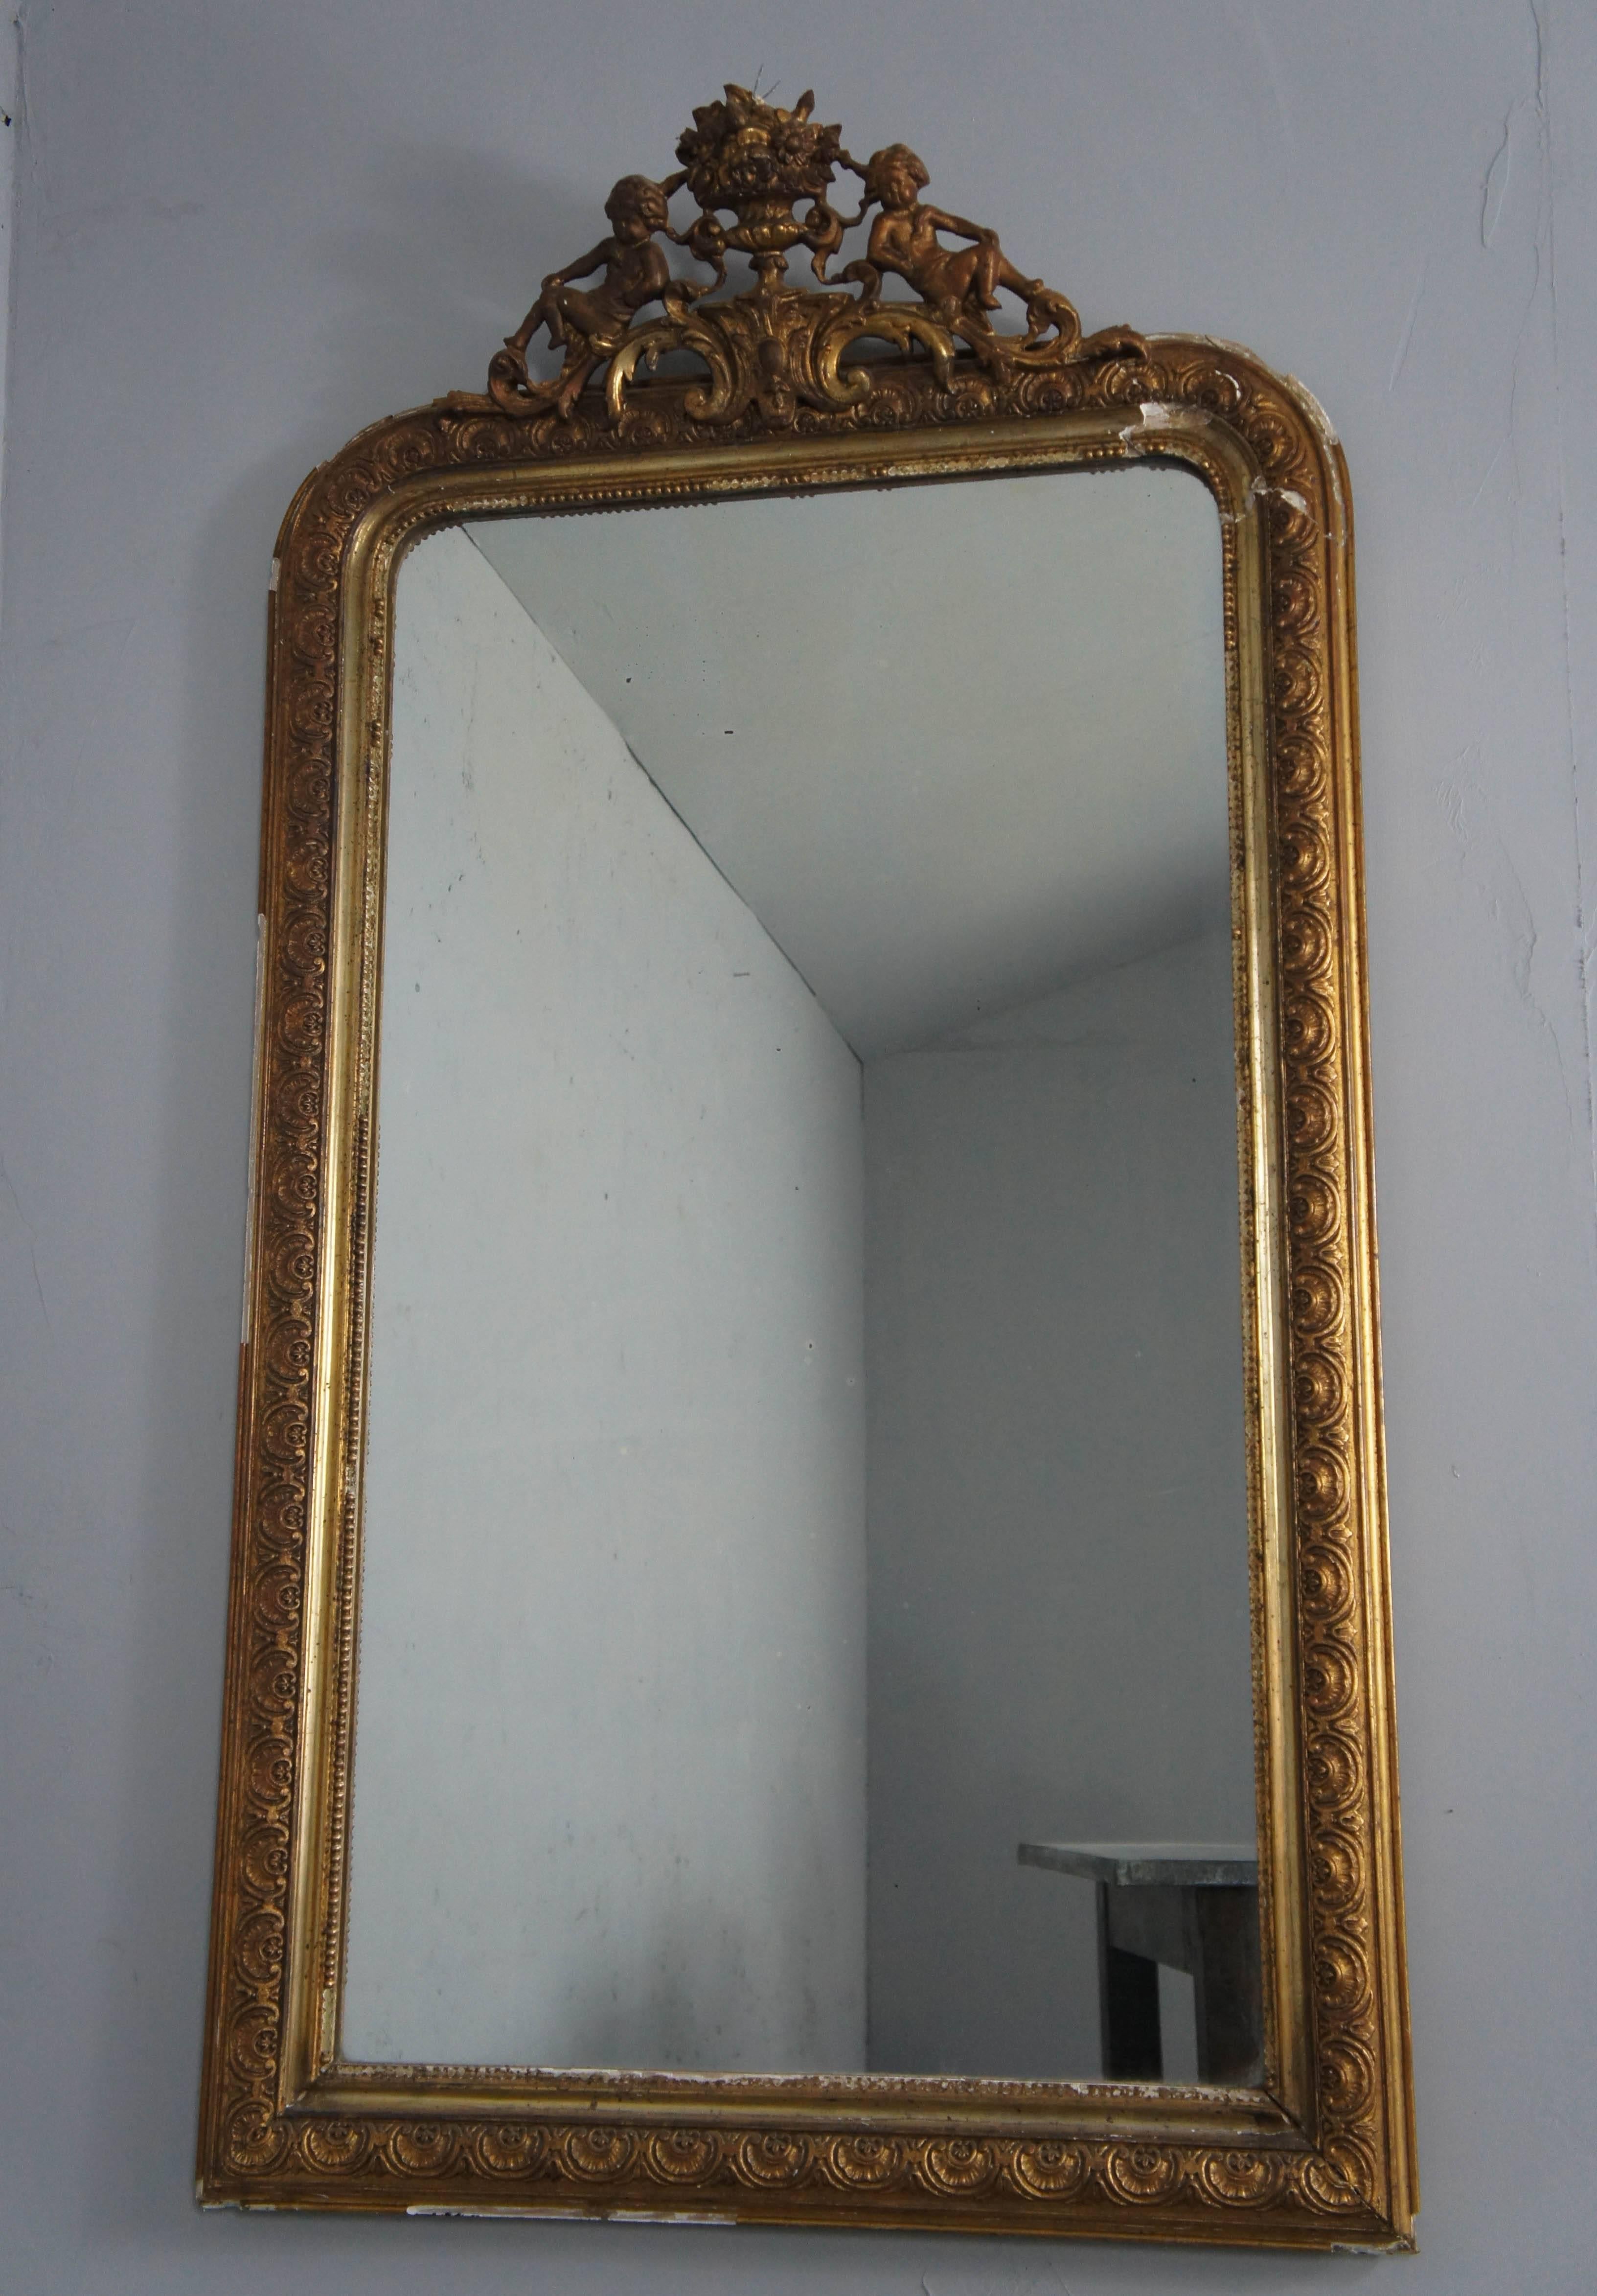 Beautiful 19th century Louis Philippe wood and gesso overmantel mirror. The gilt frame is crested with a highly decorative pair of cherubs with an arrangement of flowers or urn.
It retains original the mirror glass, which is slightly foxed and